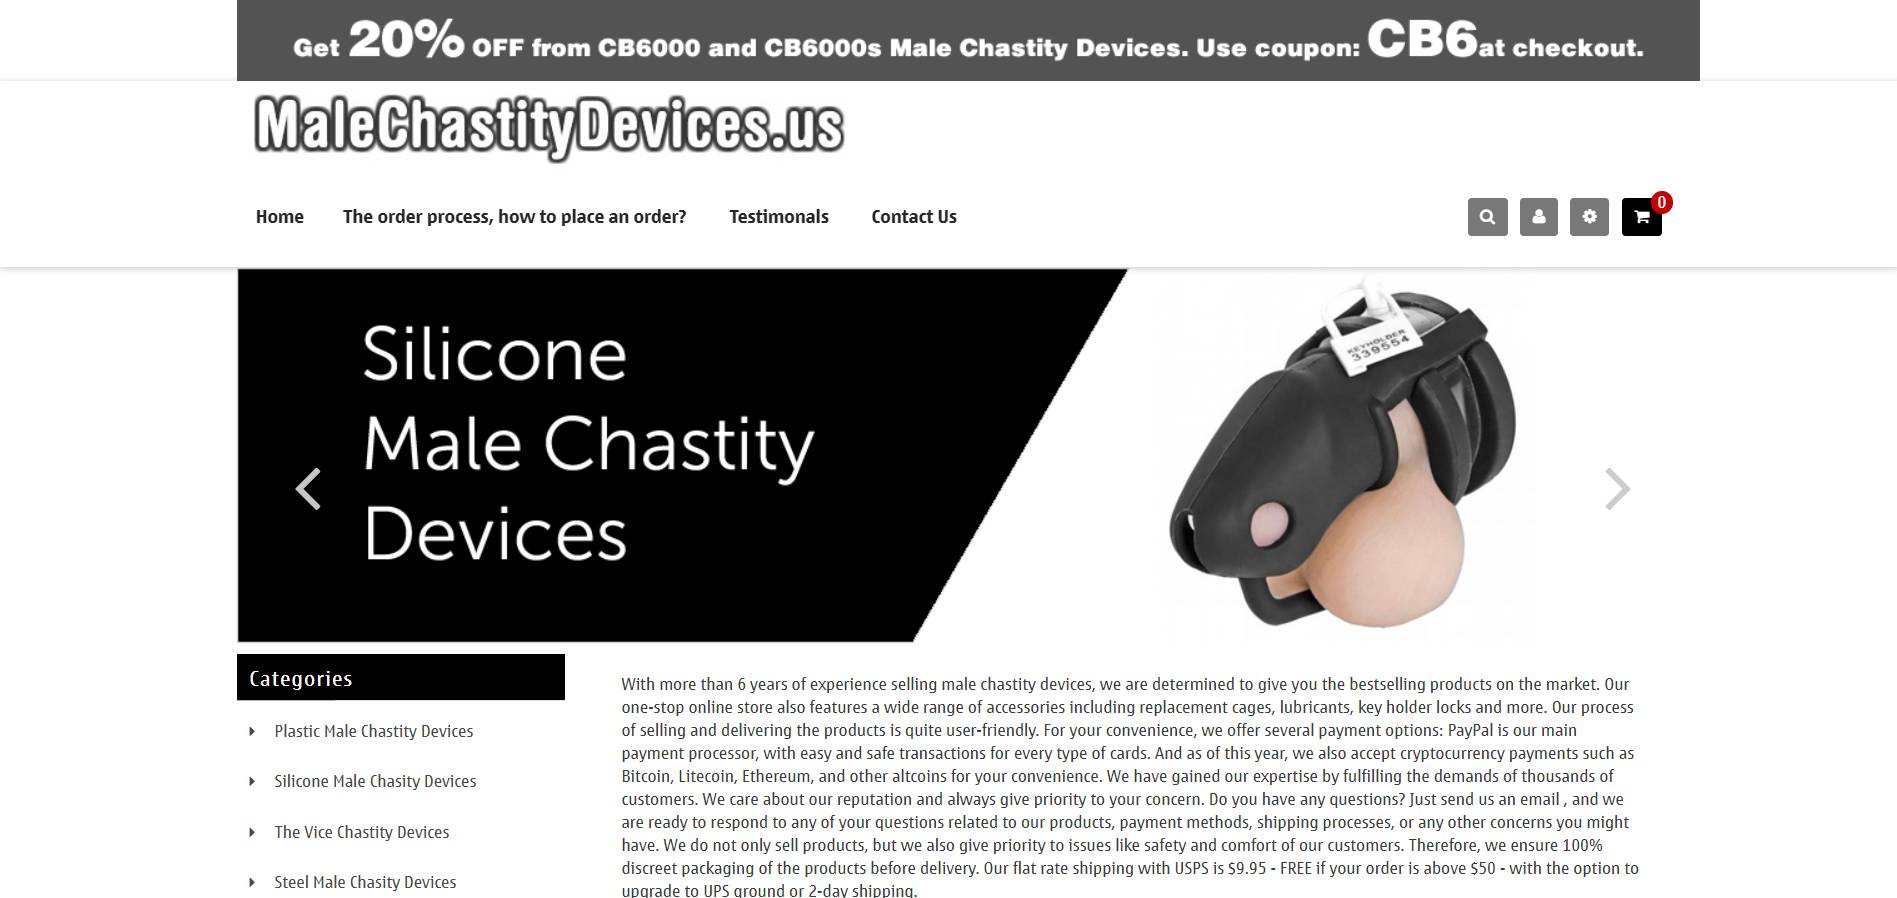 MaleChastityDevices